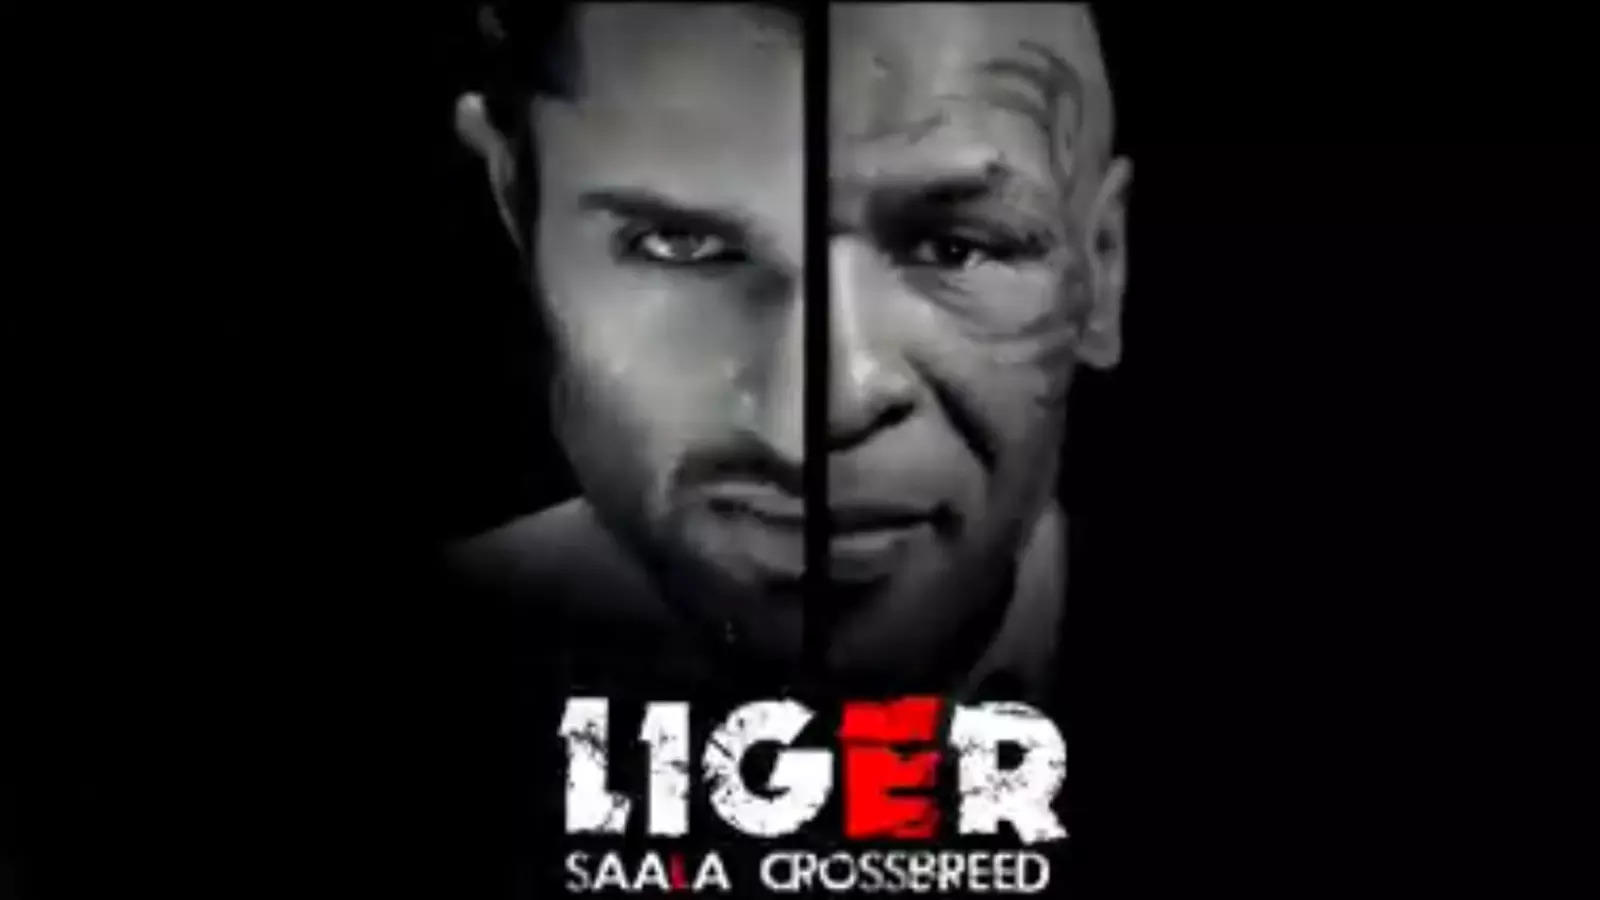 Mike Tyson to make his Bollywood debut in the Vijay Deverakonda and Ananya Panday starrer Liger